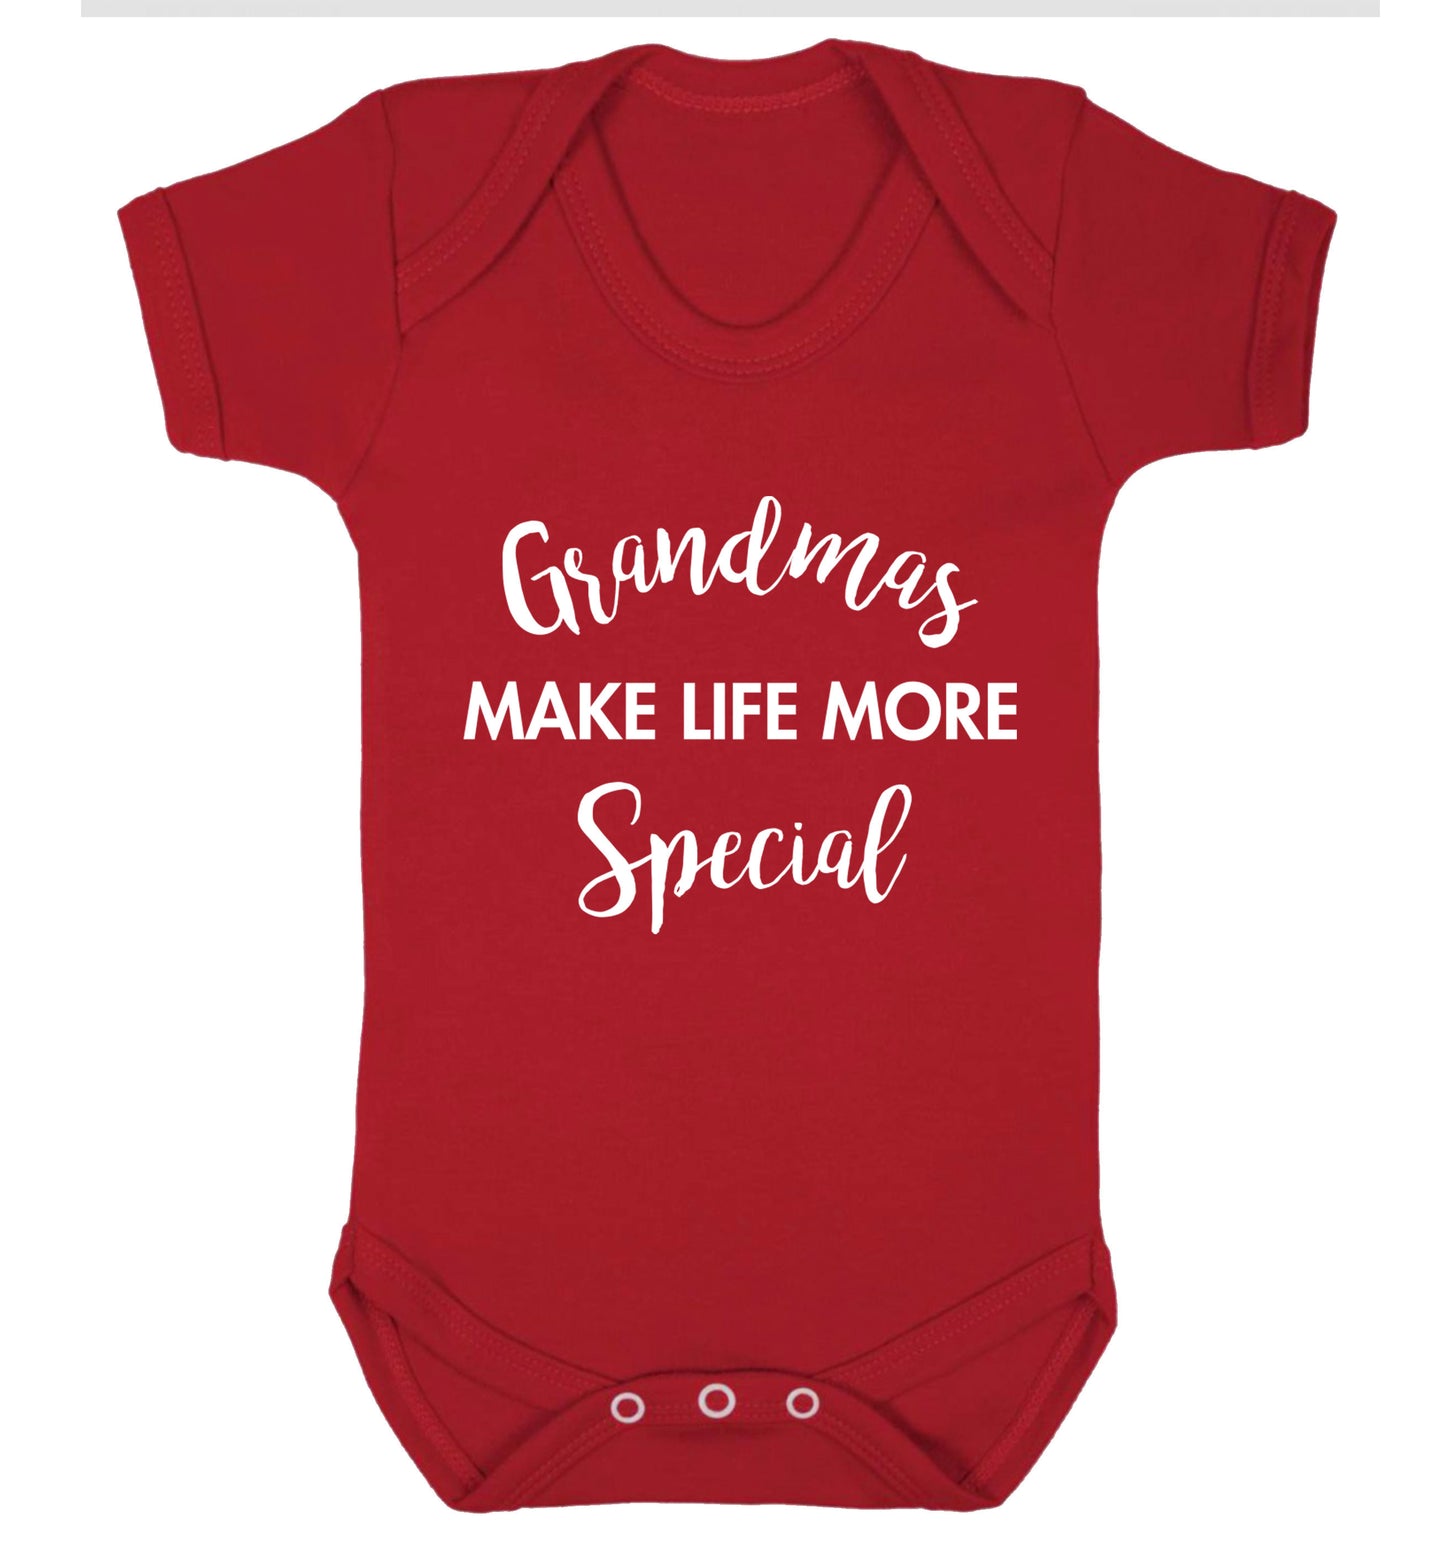 Grandmas make life more special Baby Vest red 18-24 months